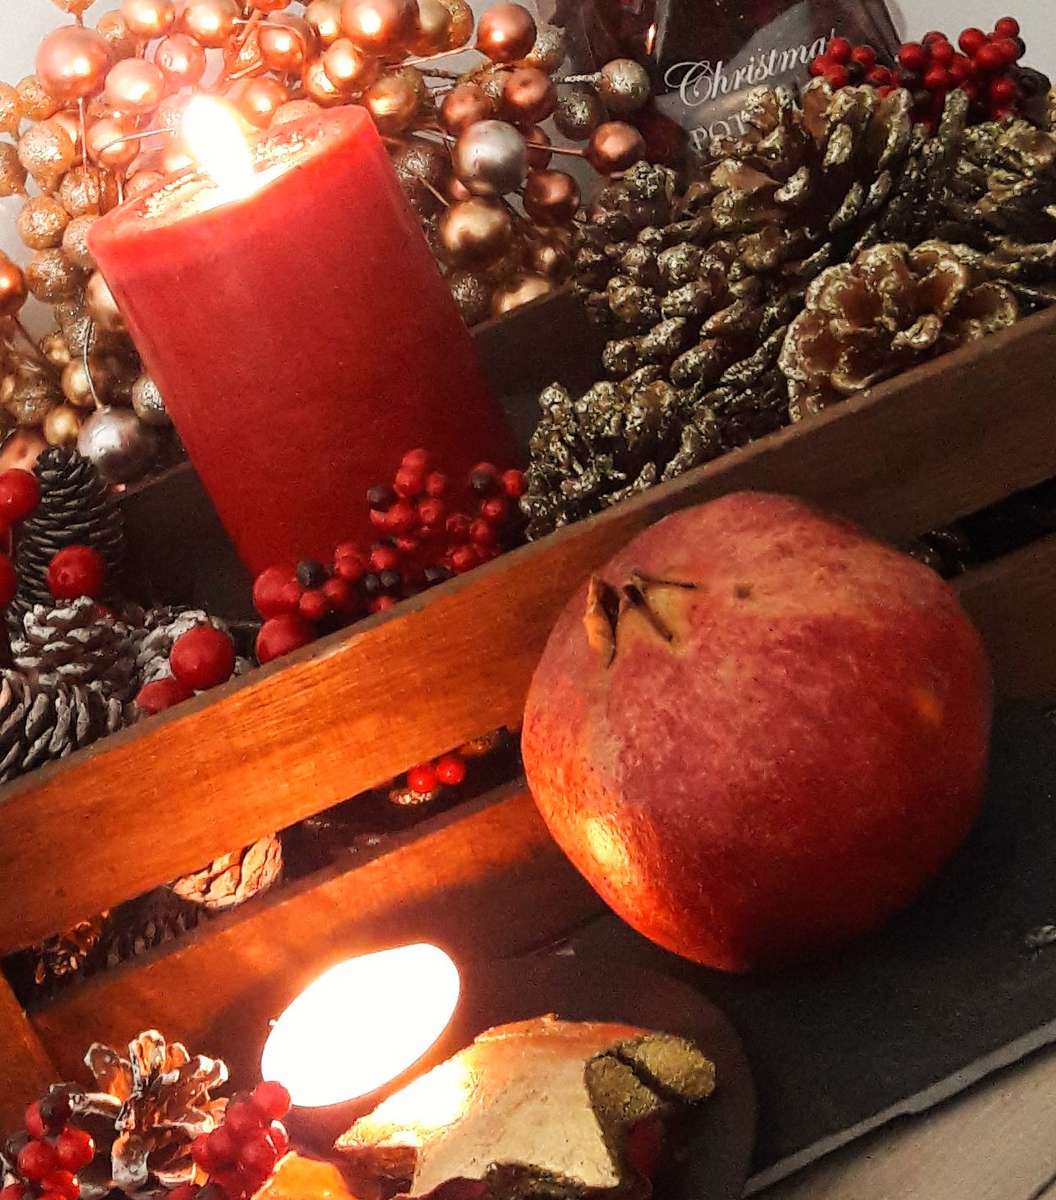 Christmas and New Year pomegranate, pinecones and candles decorations in Greece